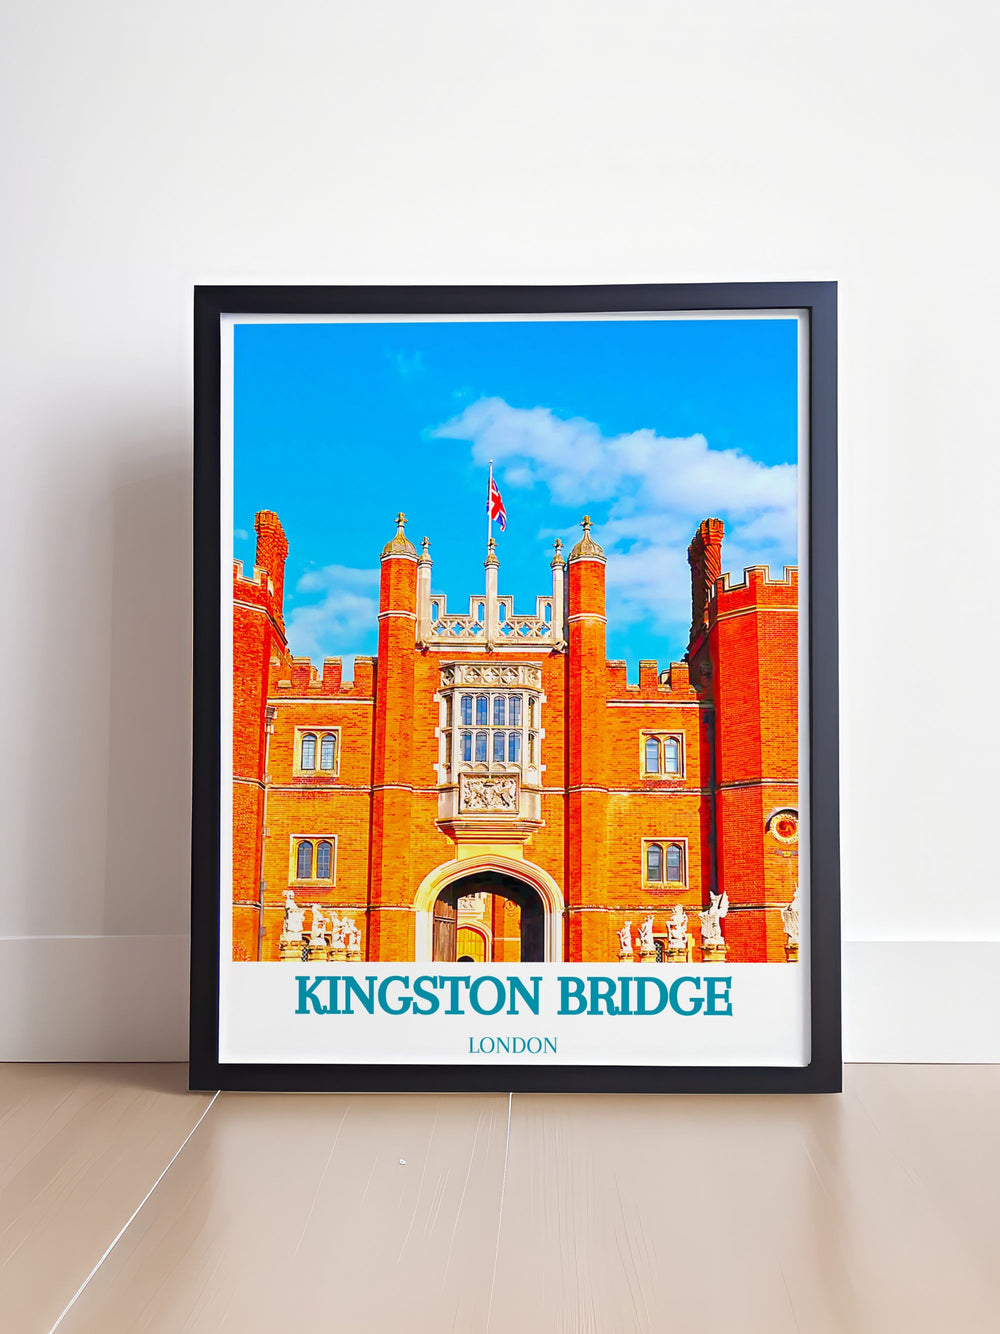 Featuring Kingston Bridge and Hampton Courts rich history and scenic surroundings, this art print highlights the enduring legacy of Londons iconic landmarks.